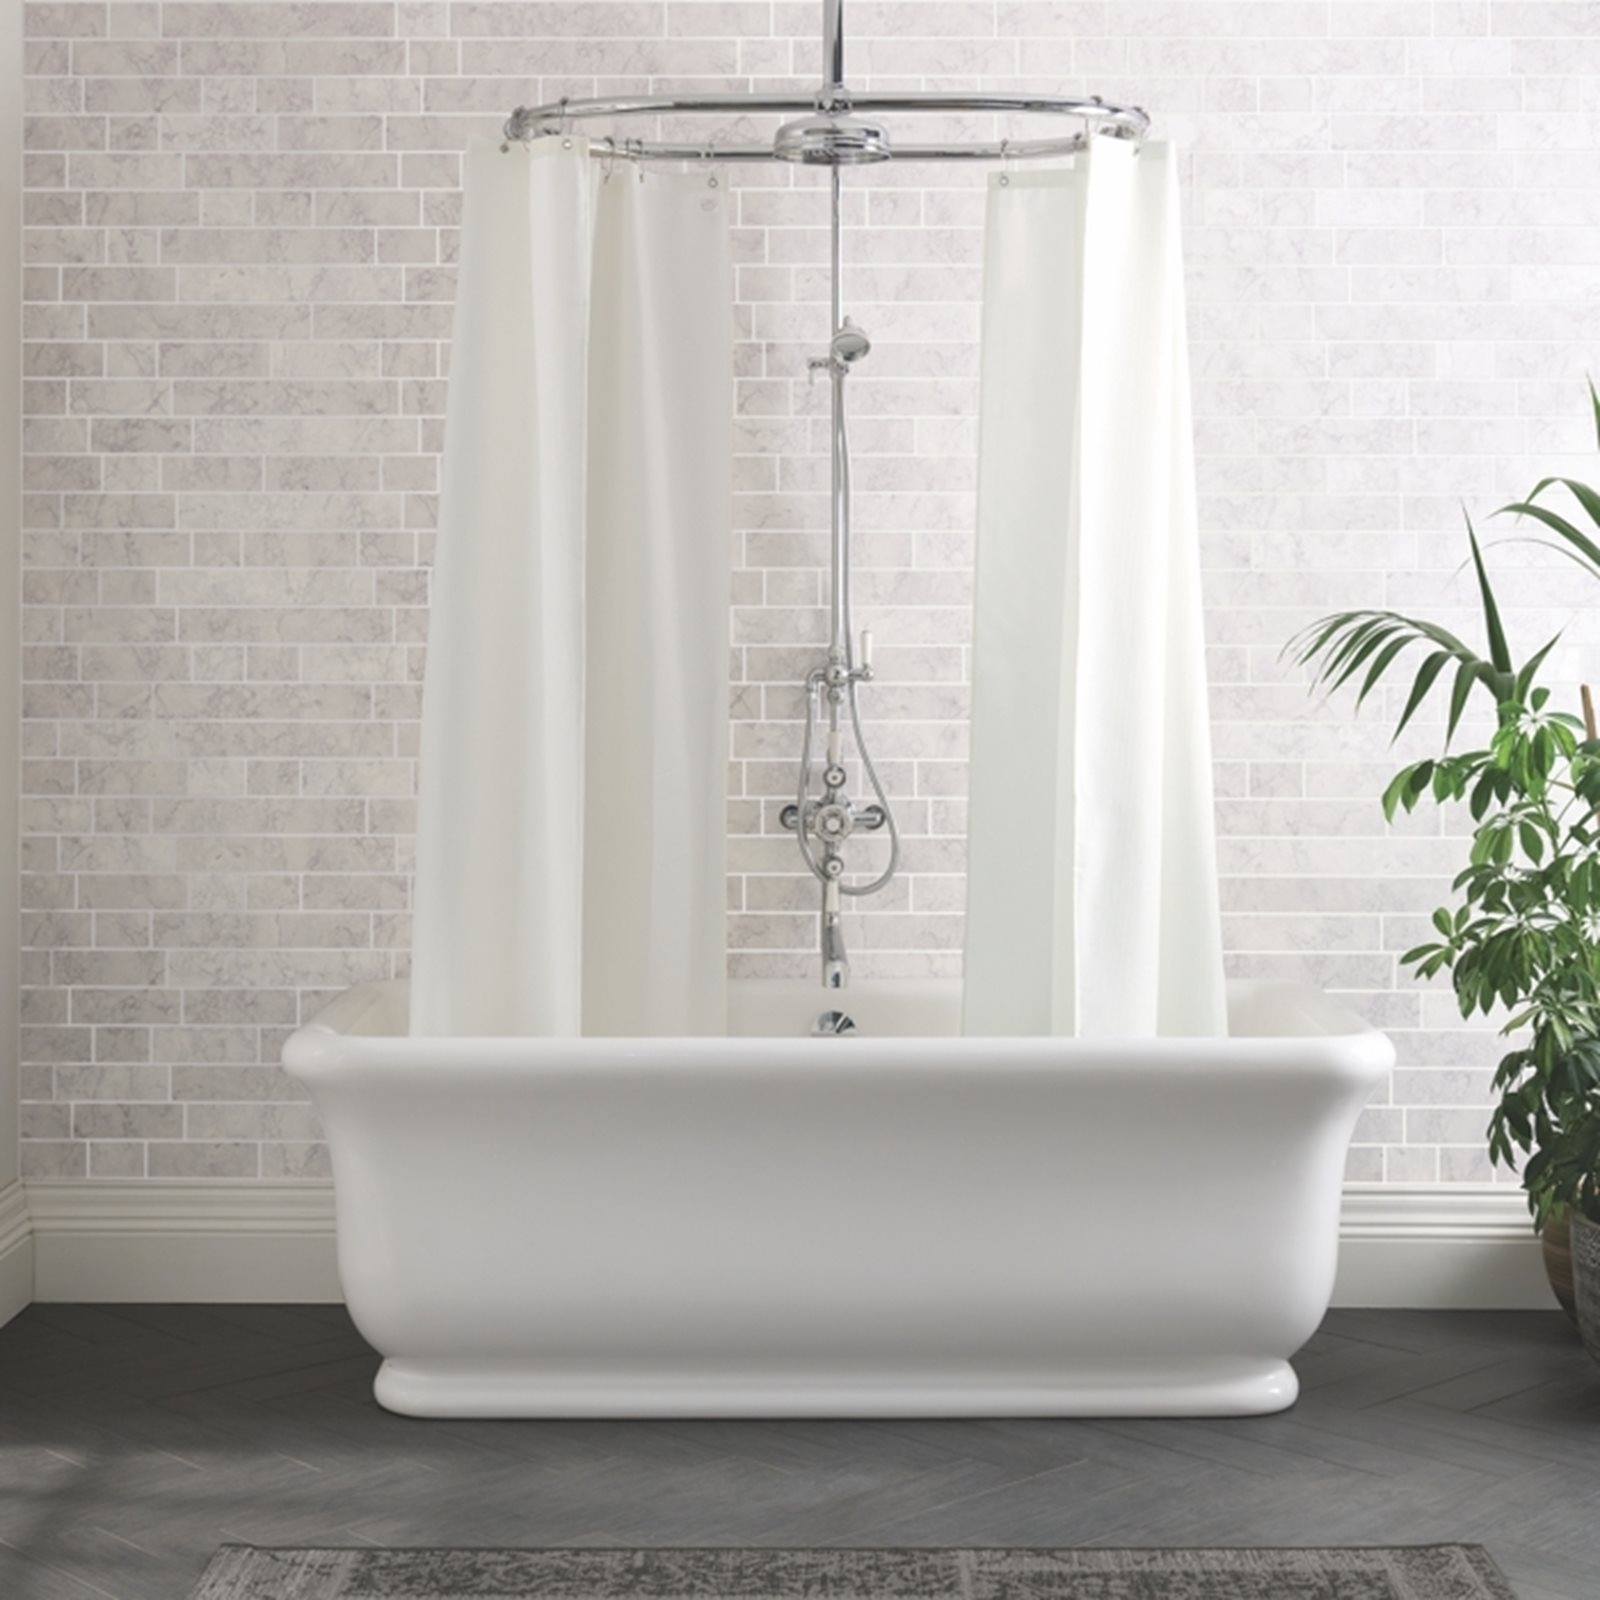 Classic Freestanding Bath double ended Image